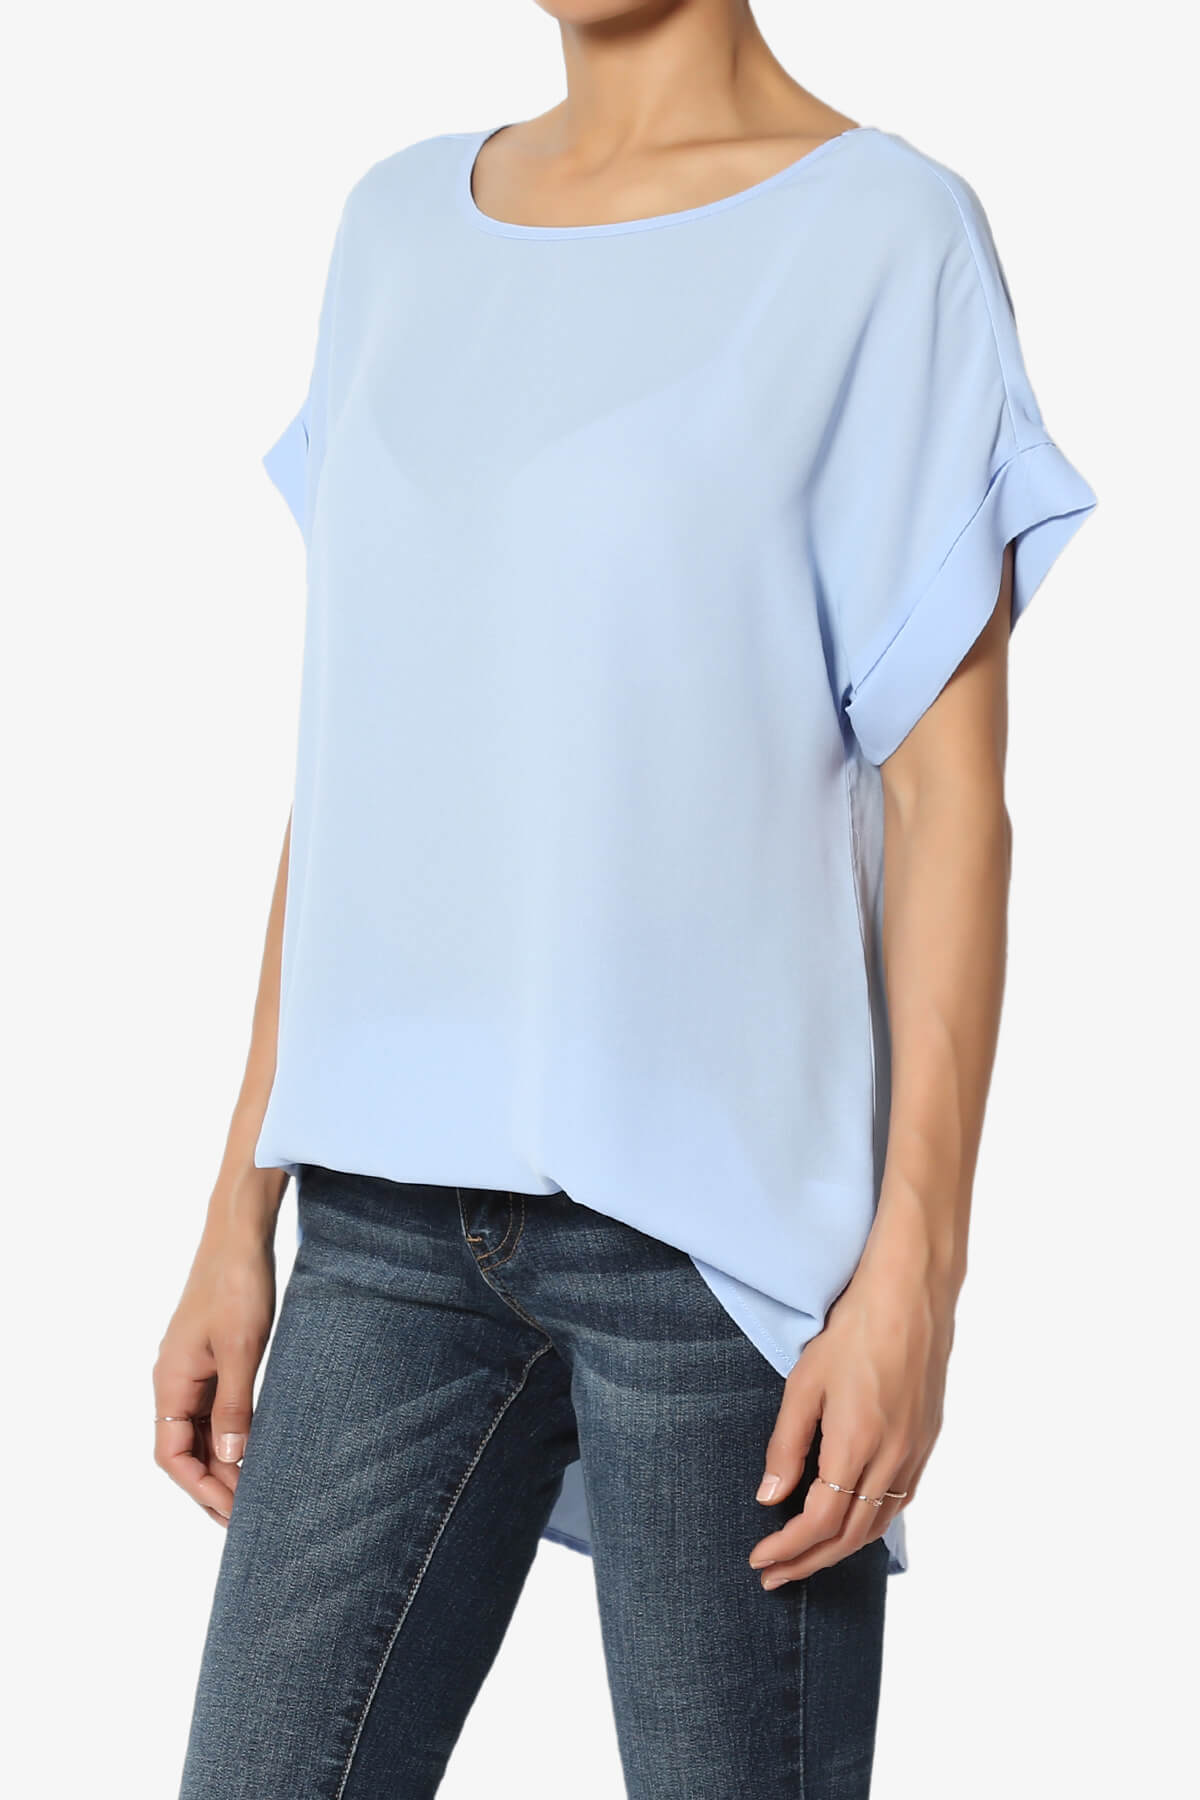 Load image into Gallery viewer, Juliette Boat Neck Chiffon Top LIGHT BLUE_3
